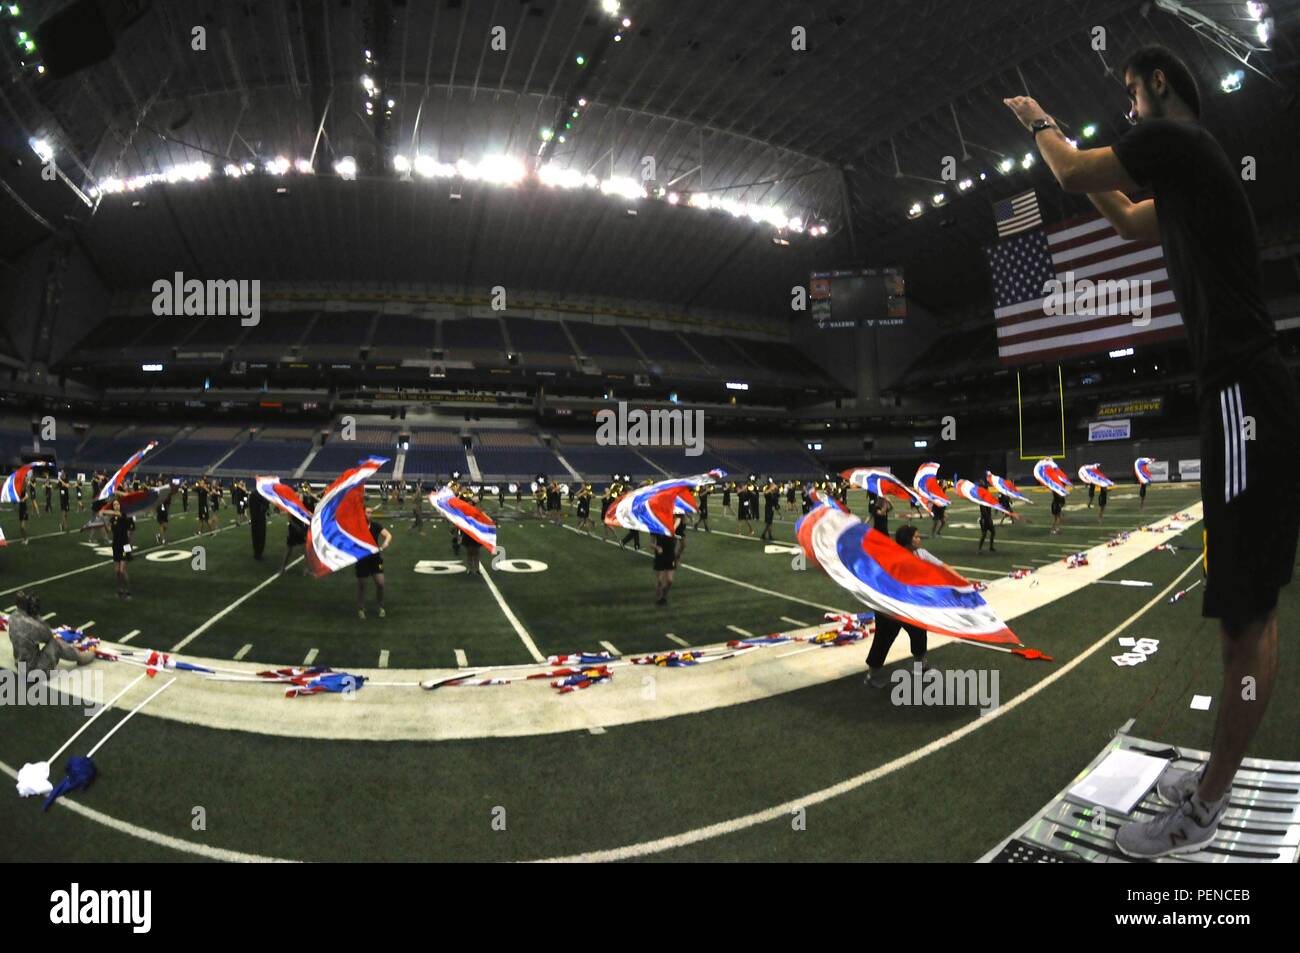 Vitaliy Popovych Drum Major From Heritage High School In Ringgold Ga Conducts Members Of The Army All American Band During A Practice At The Alamodome Jan 7 San Antonio The Top High School